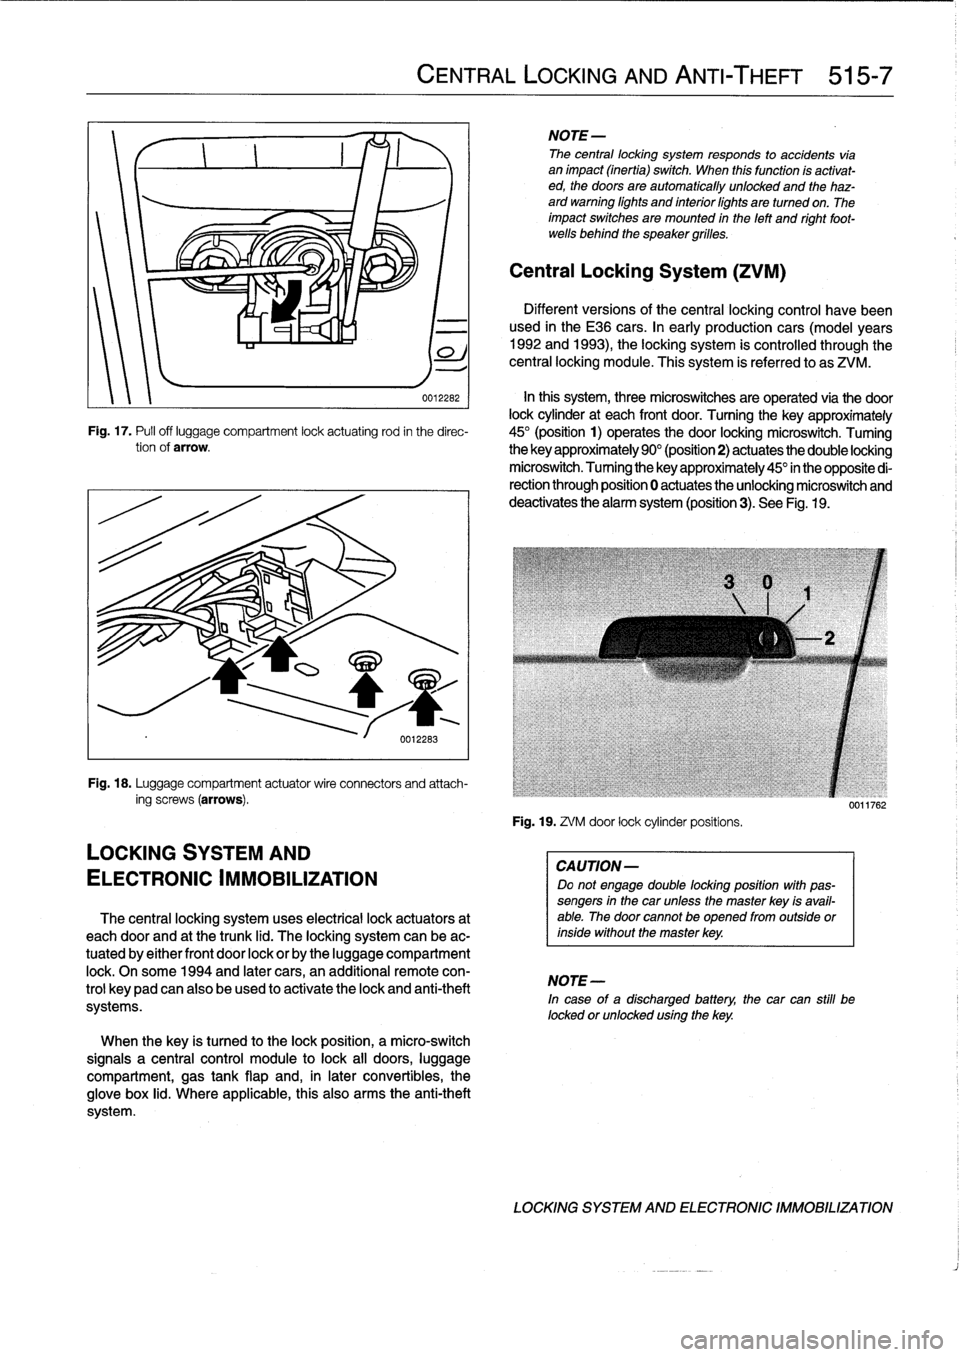 BMW 318i 1997 E36 Workshop Manual 
002262

	

In
this
system,
three
microswitches
are
operated
via
the
door
lock
cylinder
at
each
front
door
.
Turning
the
key
approximately
Fig
.
17
.
Pufl
off
luggage
compartment
lock
actuating
rod
in